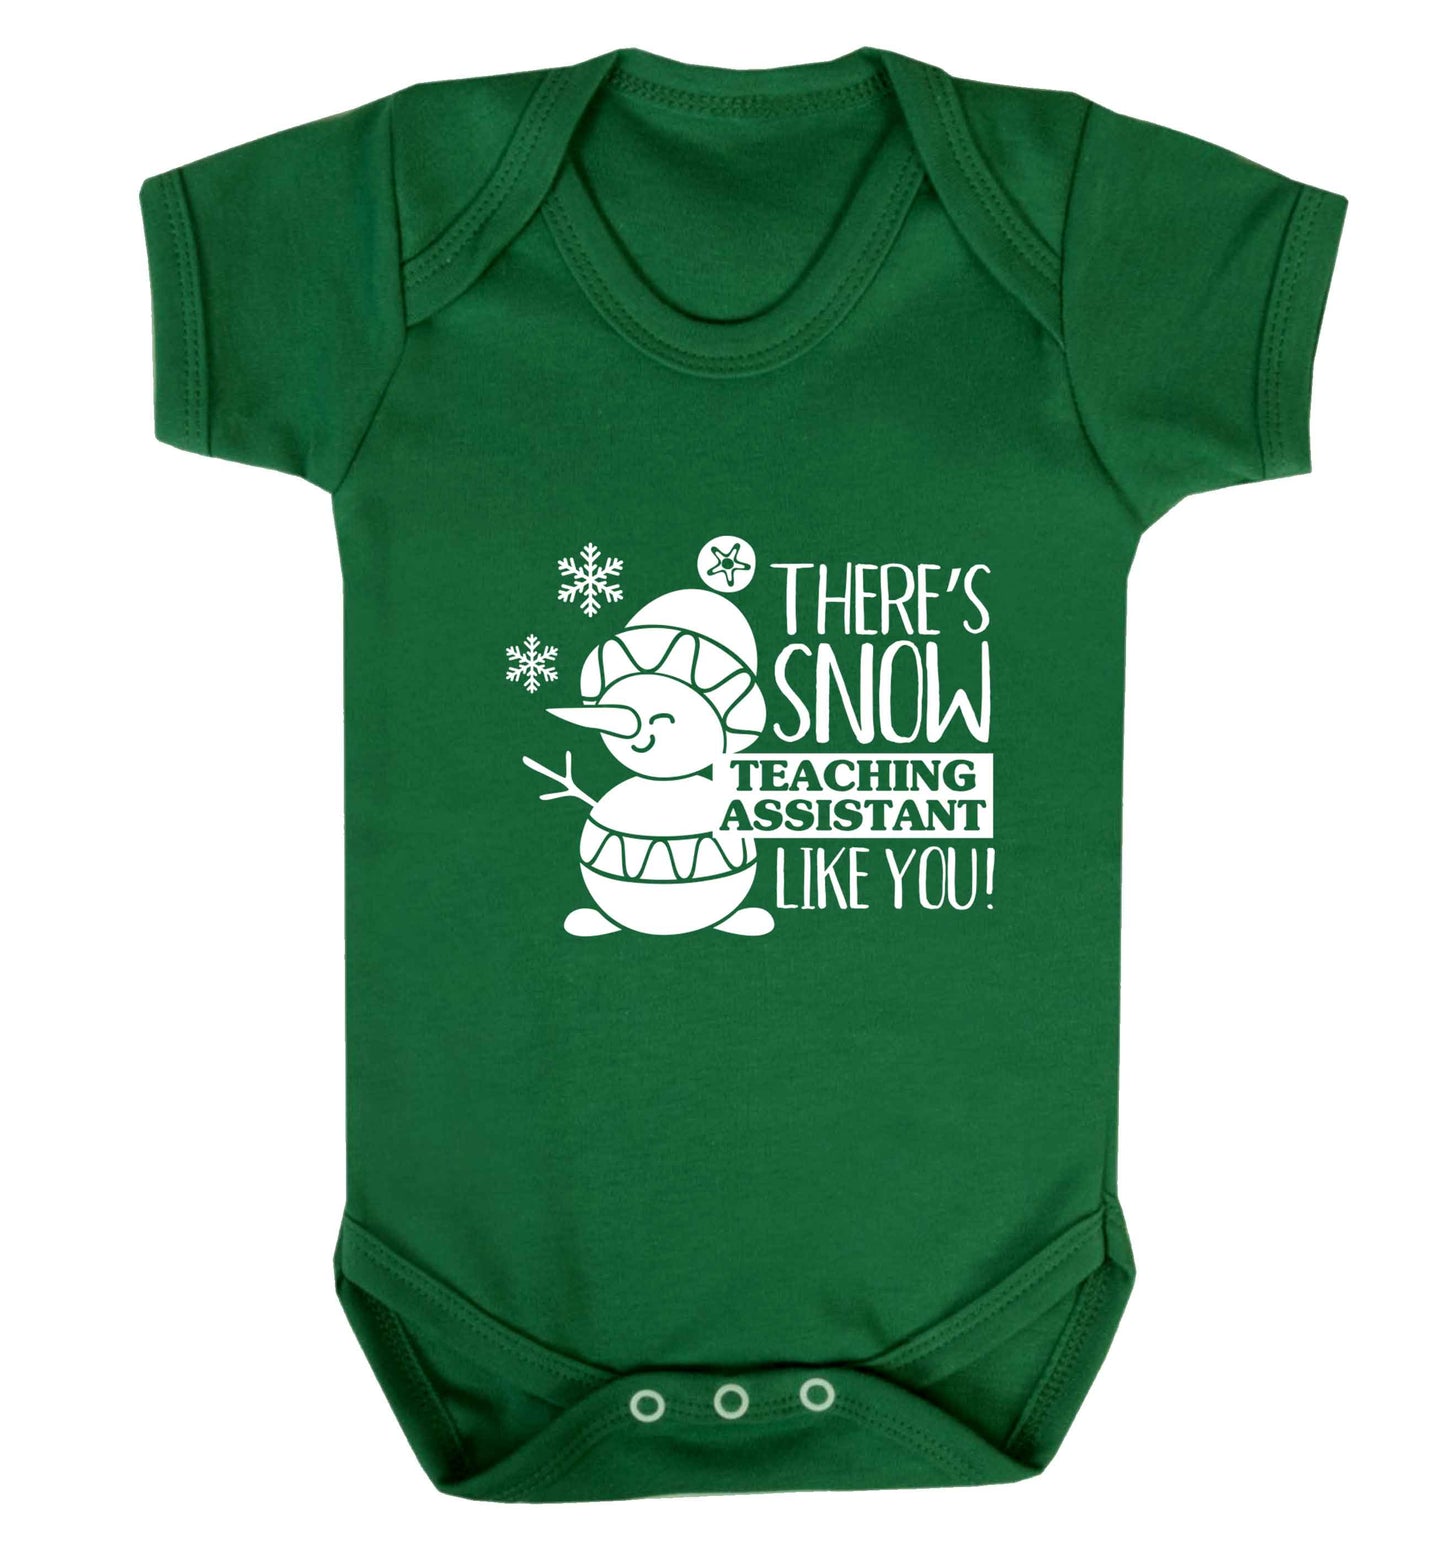 There's snow teaching assistant like you baby vest green 18-24 months